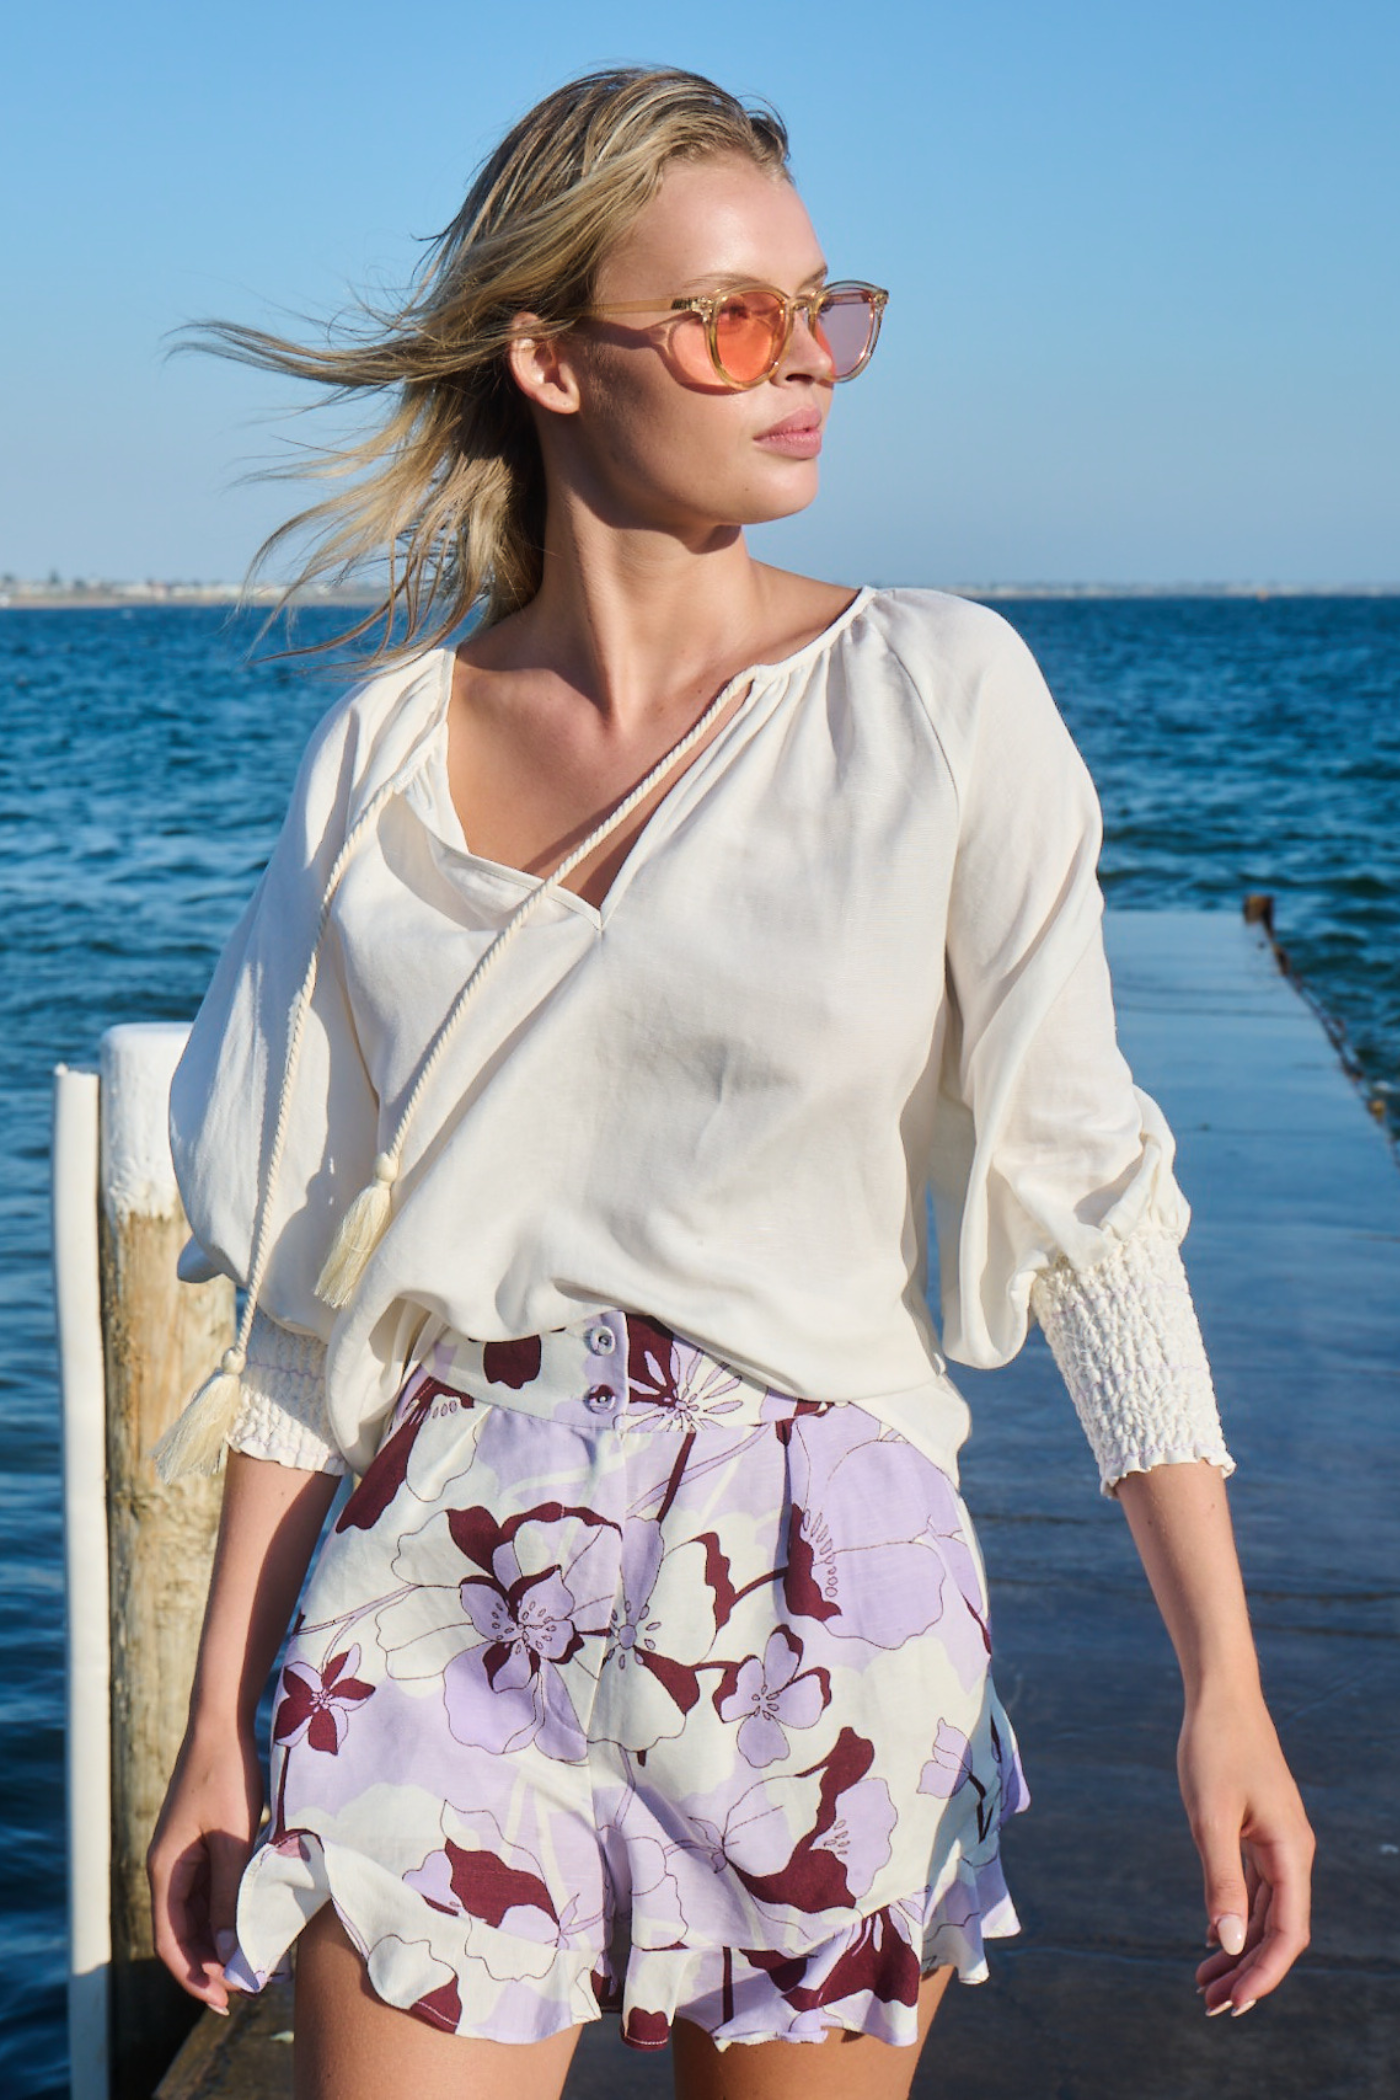 blonde girl wearing pink sunglasses and lilac shorts